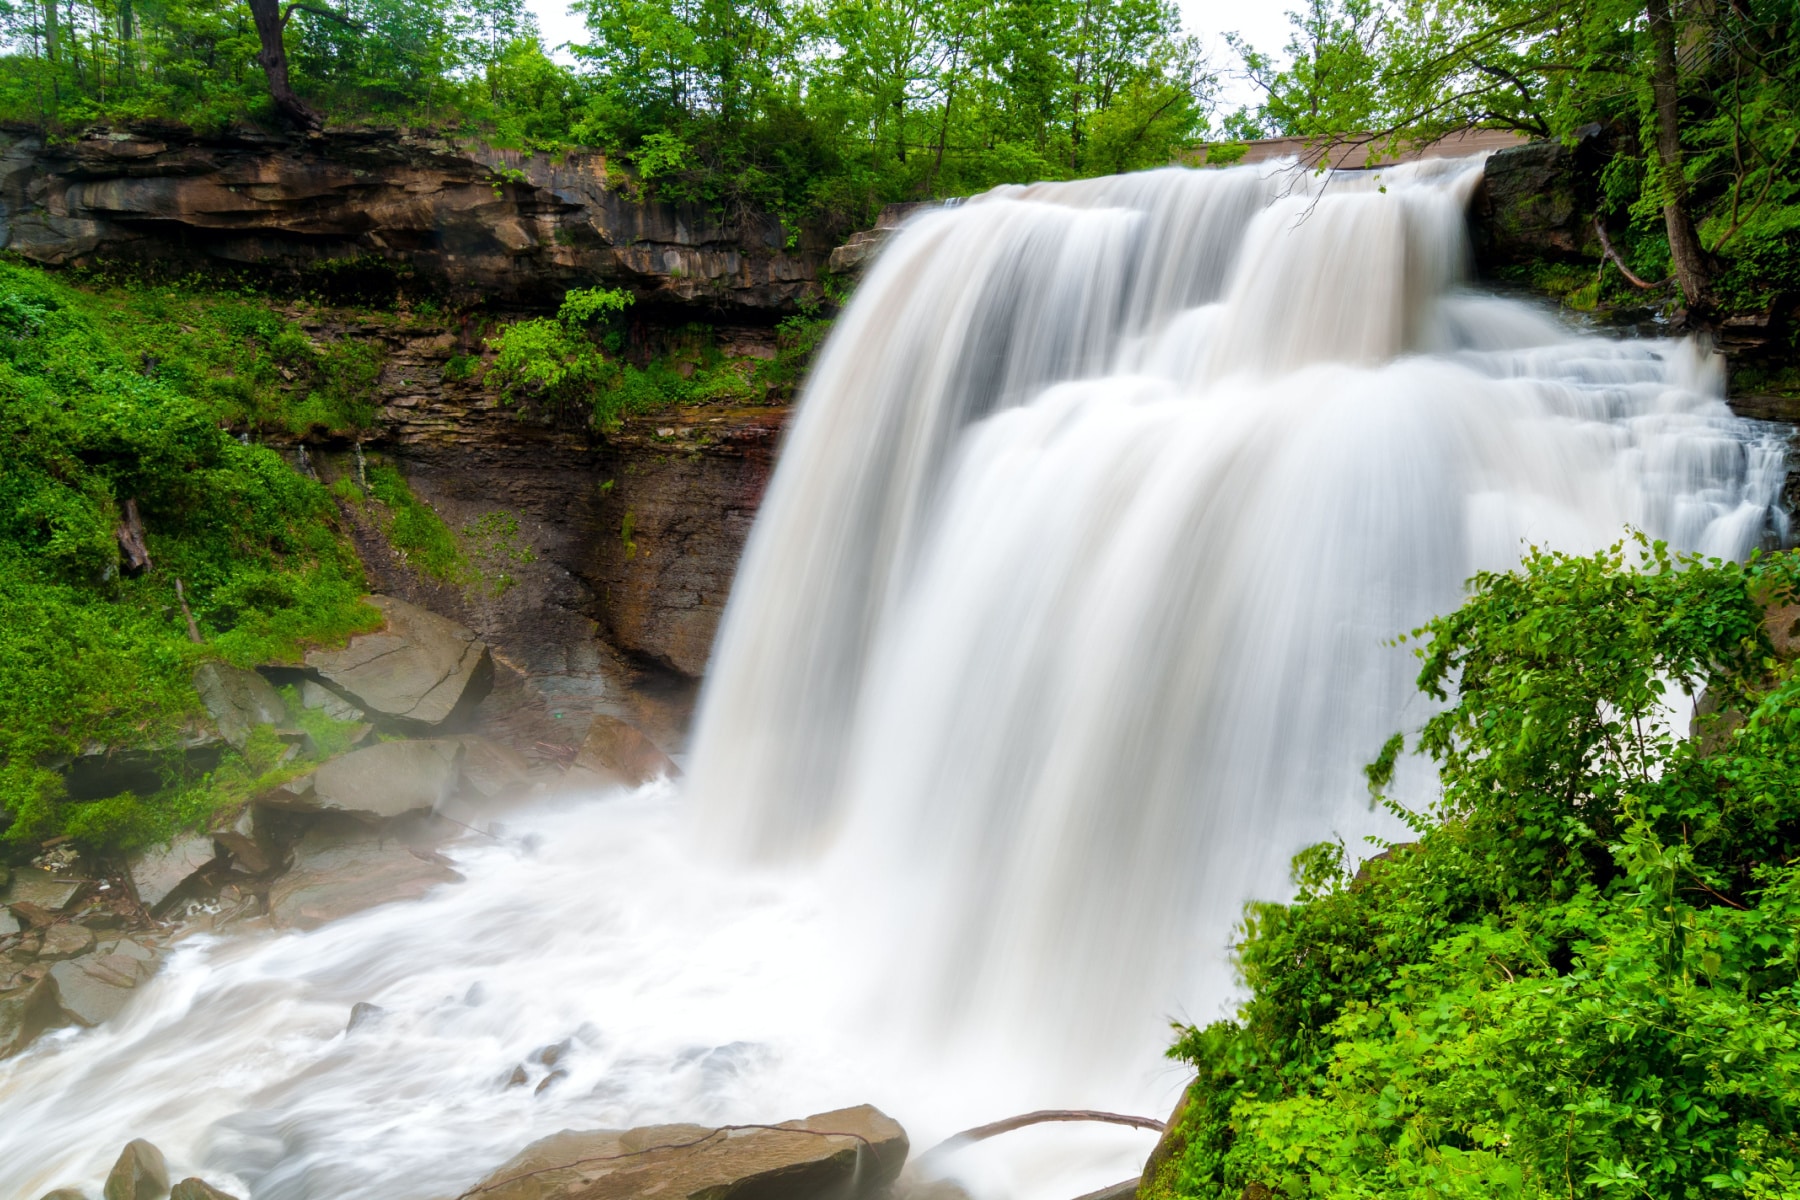 Brandywine Falls in Spring is one reason Cuyahoga Valley is one of the best national parks to visit in April